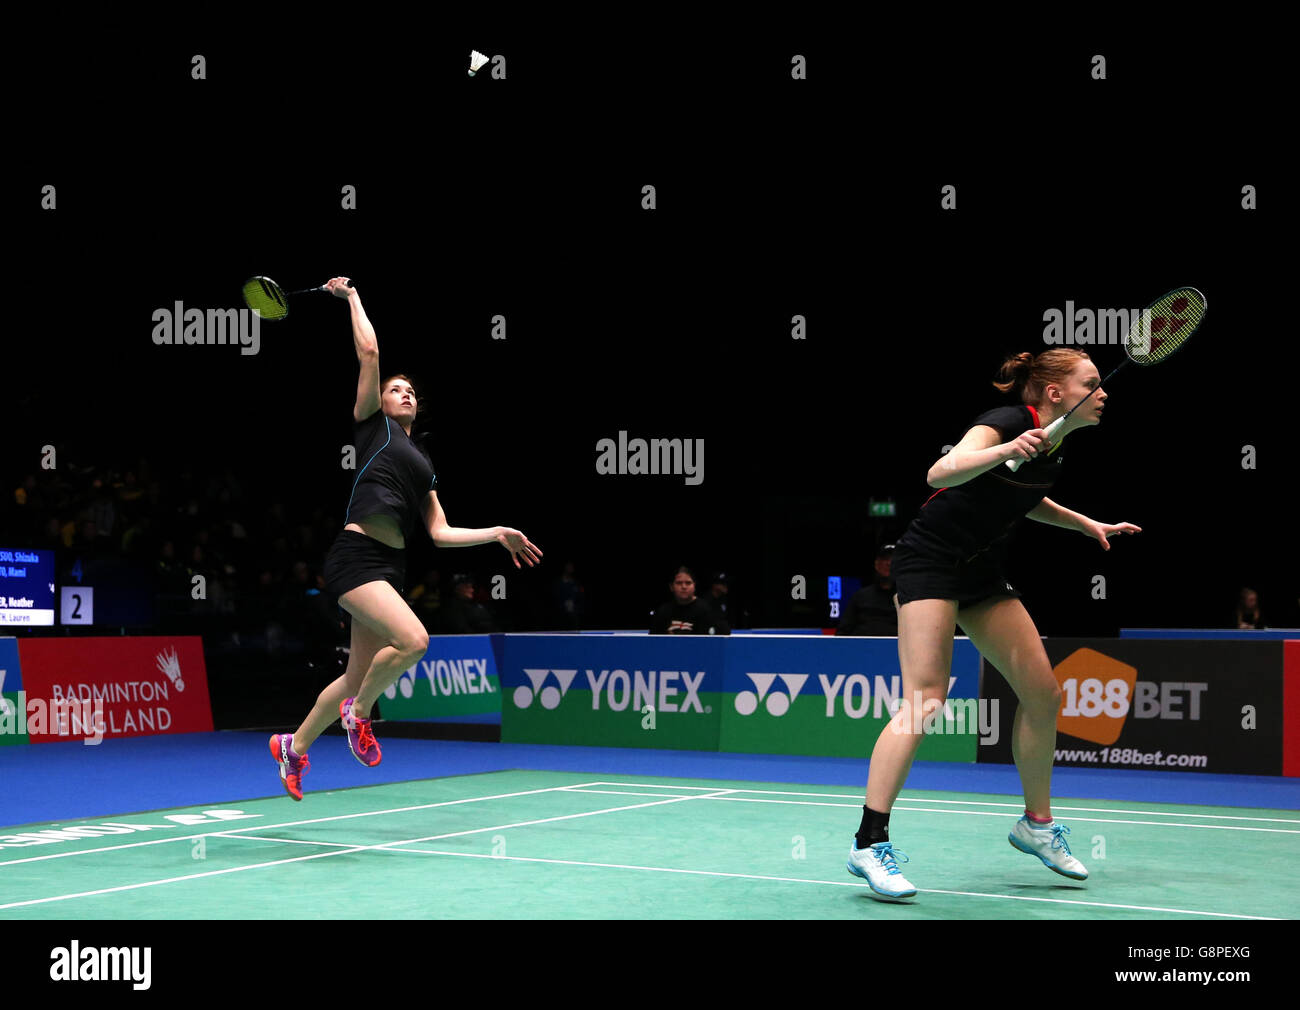 England's Heather Olver (left) and Lauren Smith in action during their women's doubles match in action during day one of the YONEX All England Open Badminton Championships at the Barclaycard Arena, Birmingham. Stock Photo